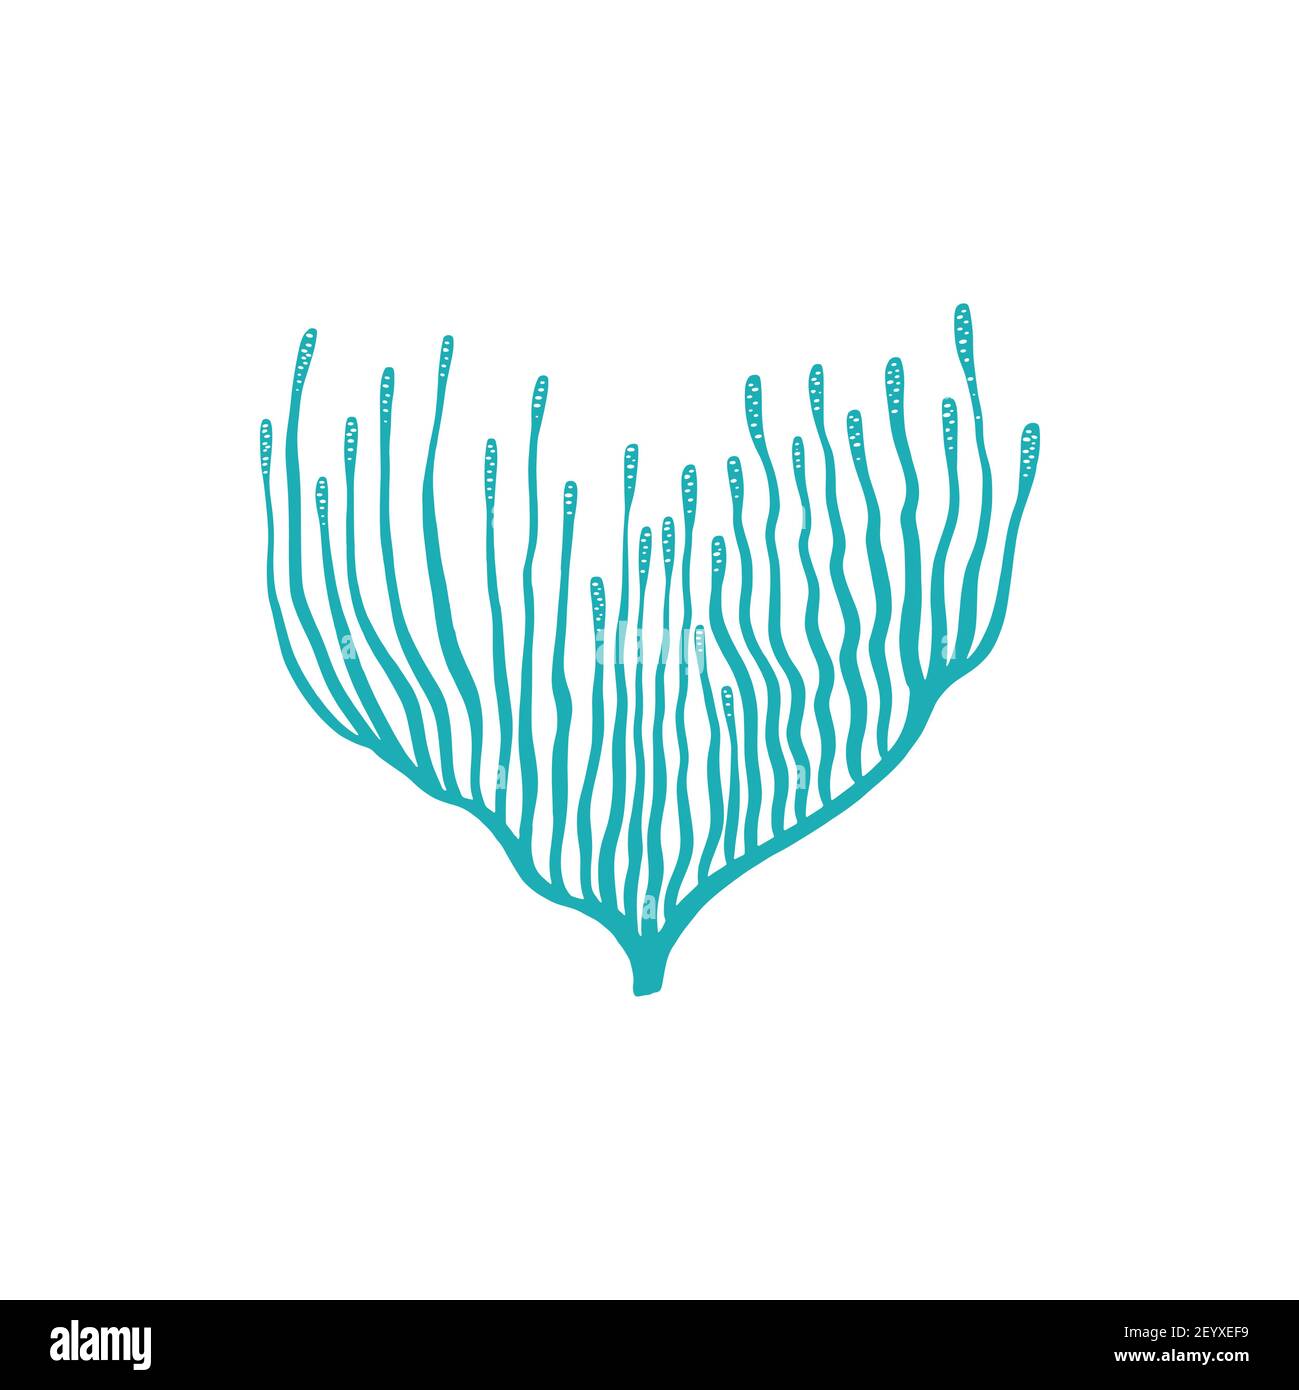 Soft aquarium coral with long tips isolatedmarine flora object. Vector underwater seaweed, aquatic exotic anemone plant. Seabed decoration, coral reef Stock Vector